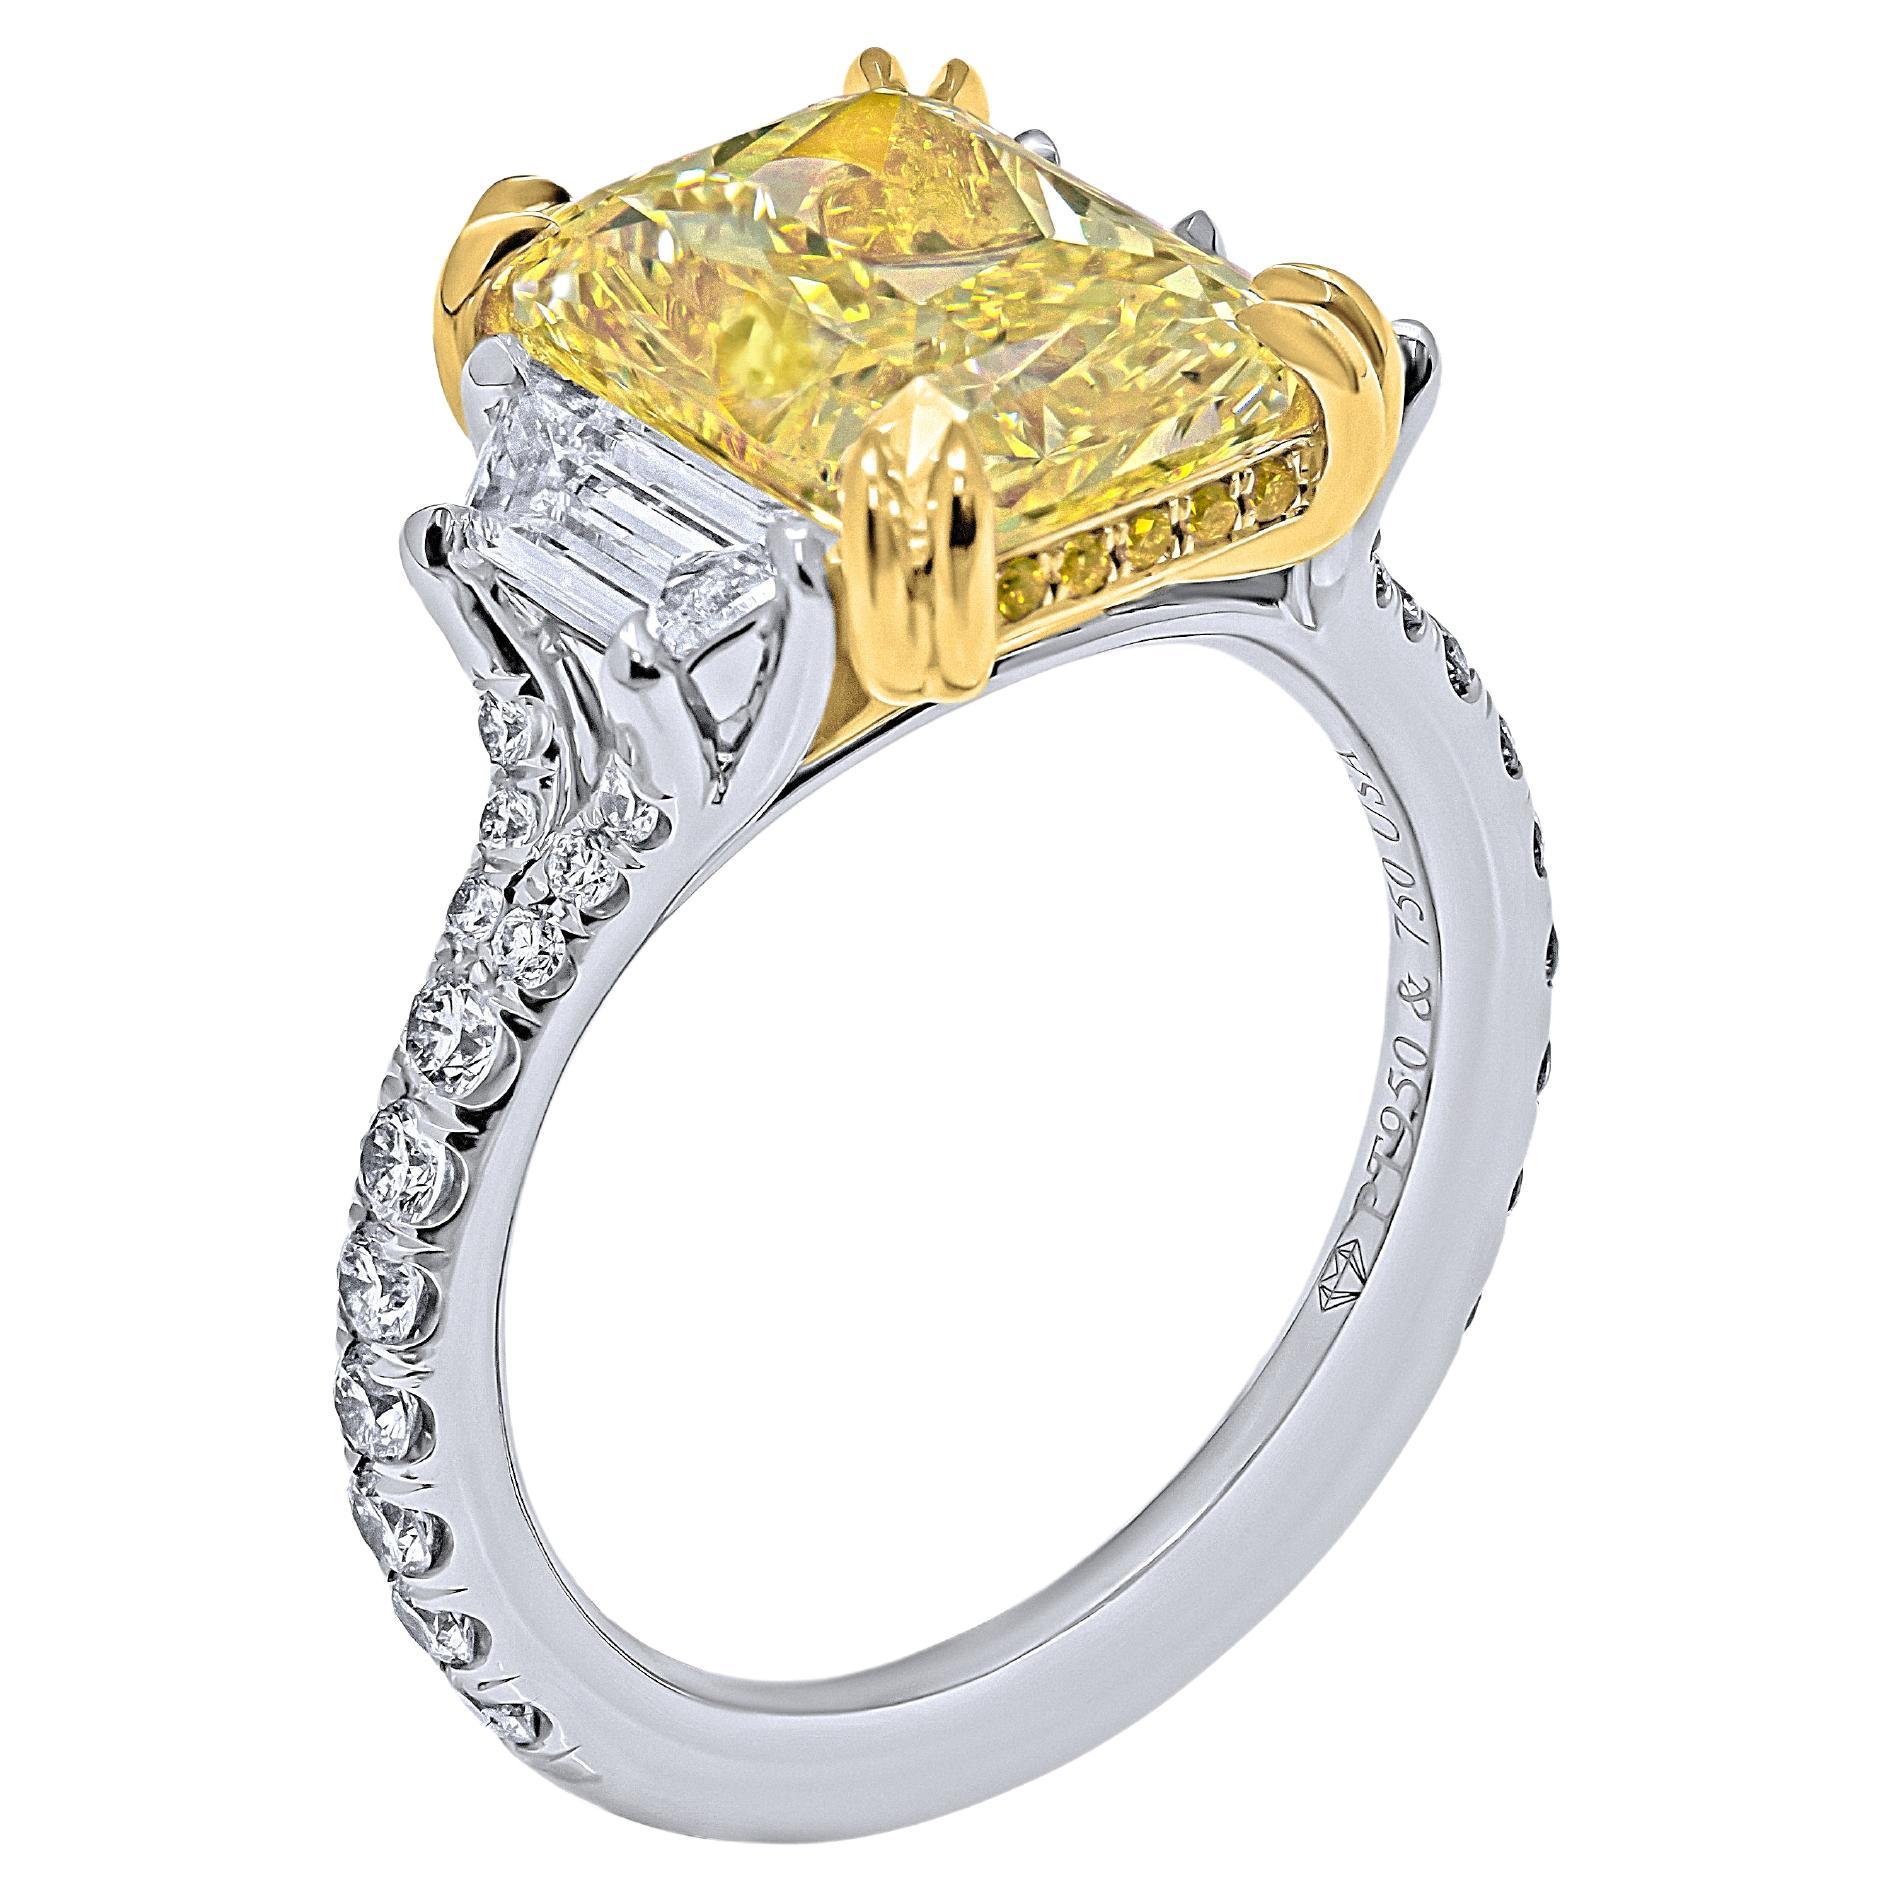 GIA Certified 3 Stone Ring with 5.02ct Fancy Intense Yellow Radiant Cut